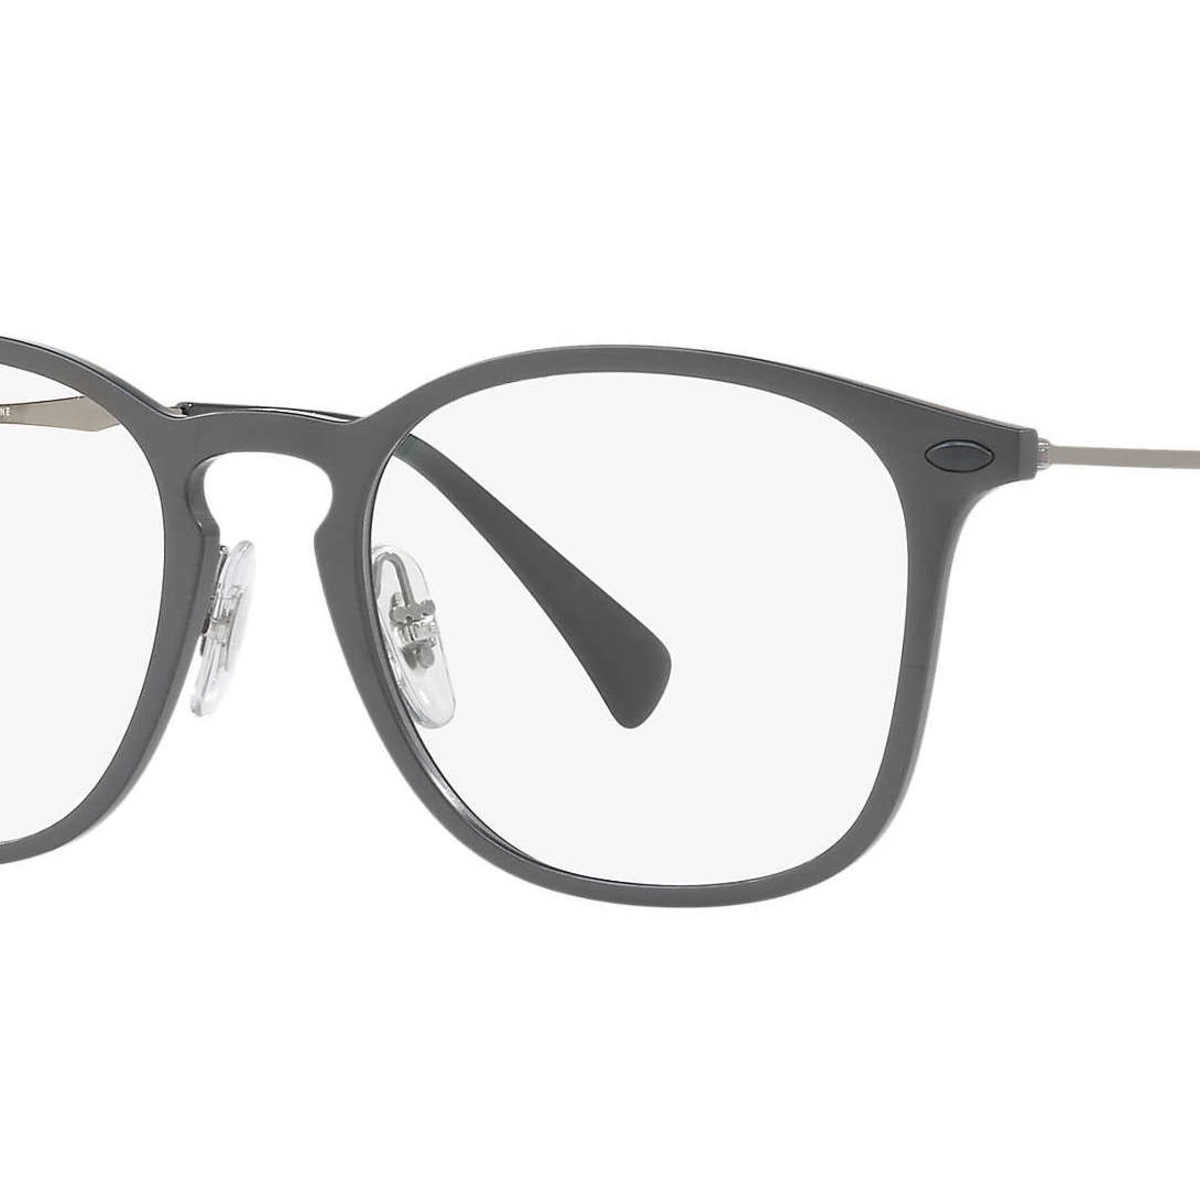 latest spectacle frames